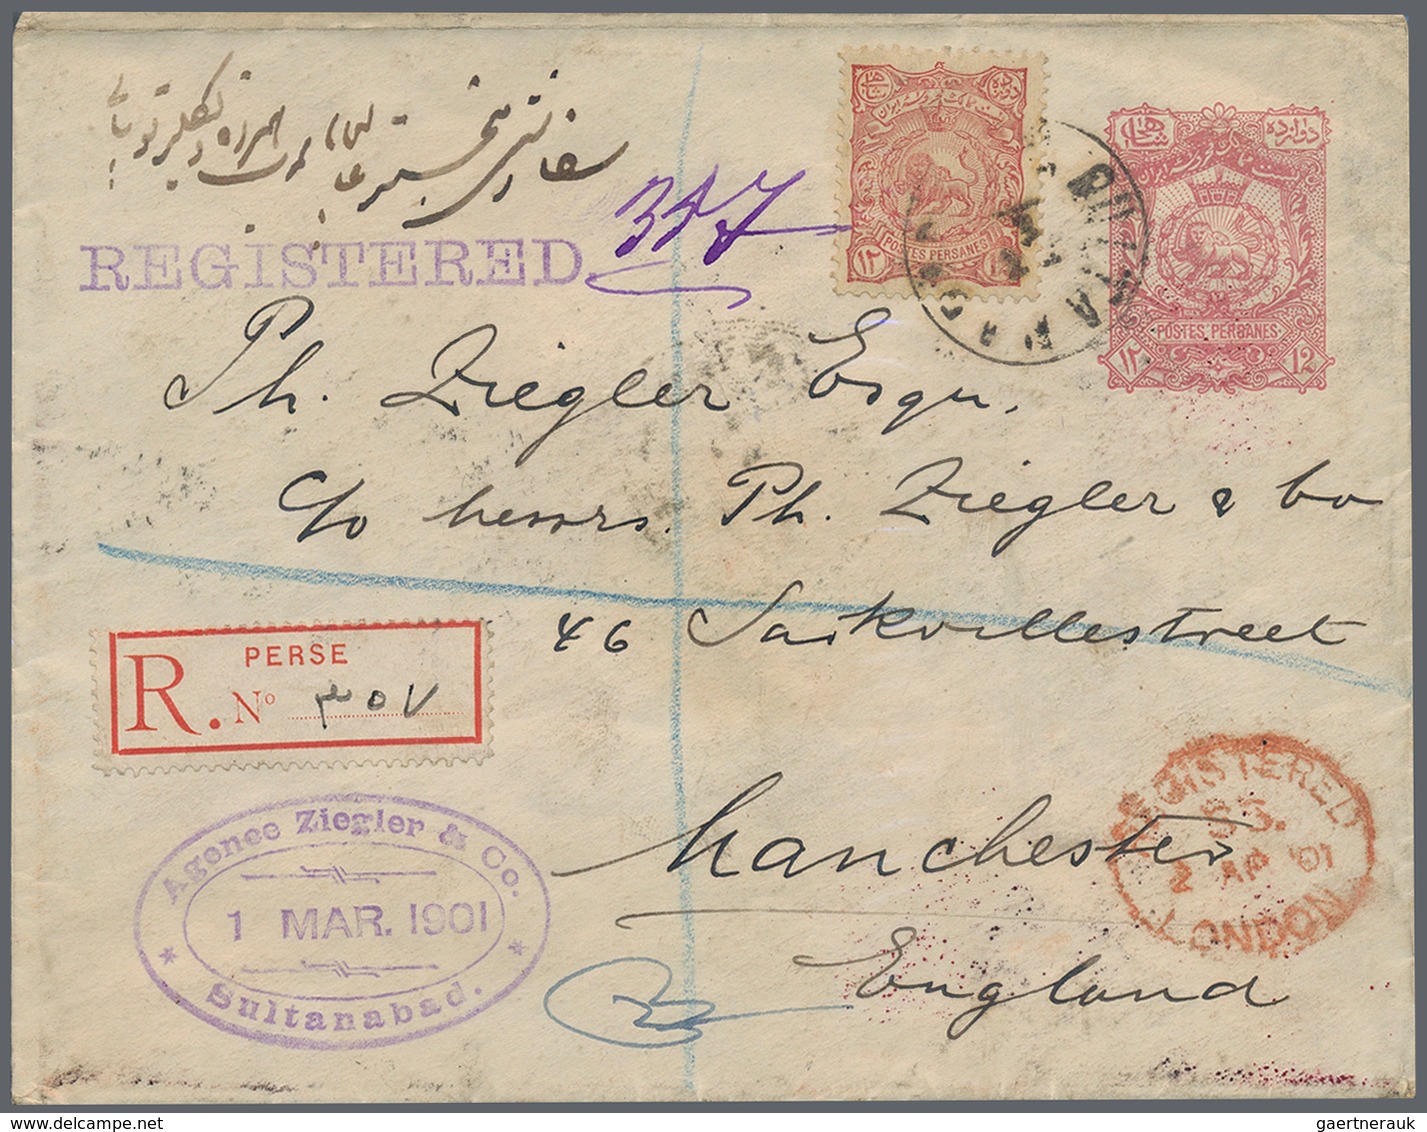 Iran: 1888-1904: Collection of 79 postal stationery envelopes of the various issues, unused and used